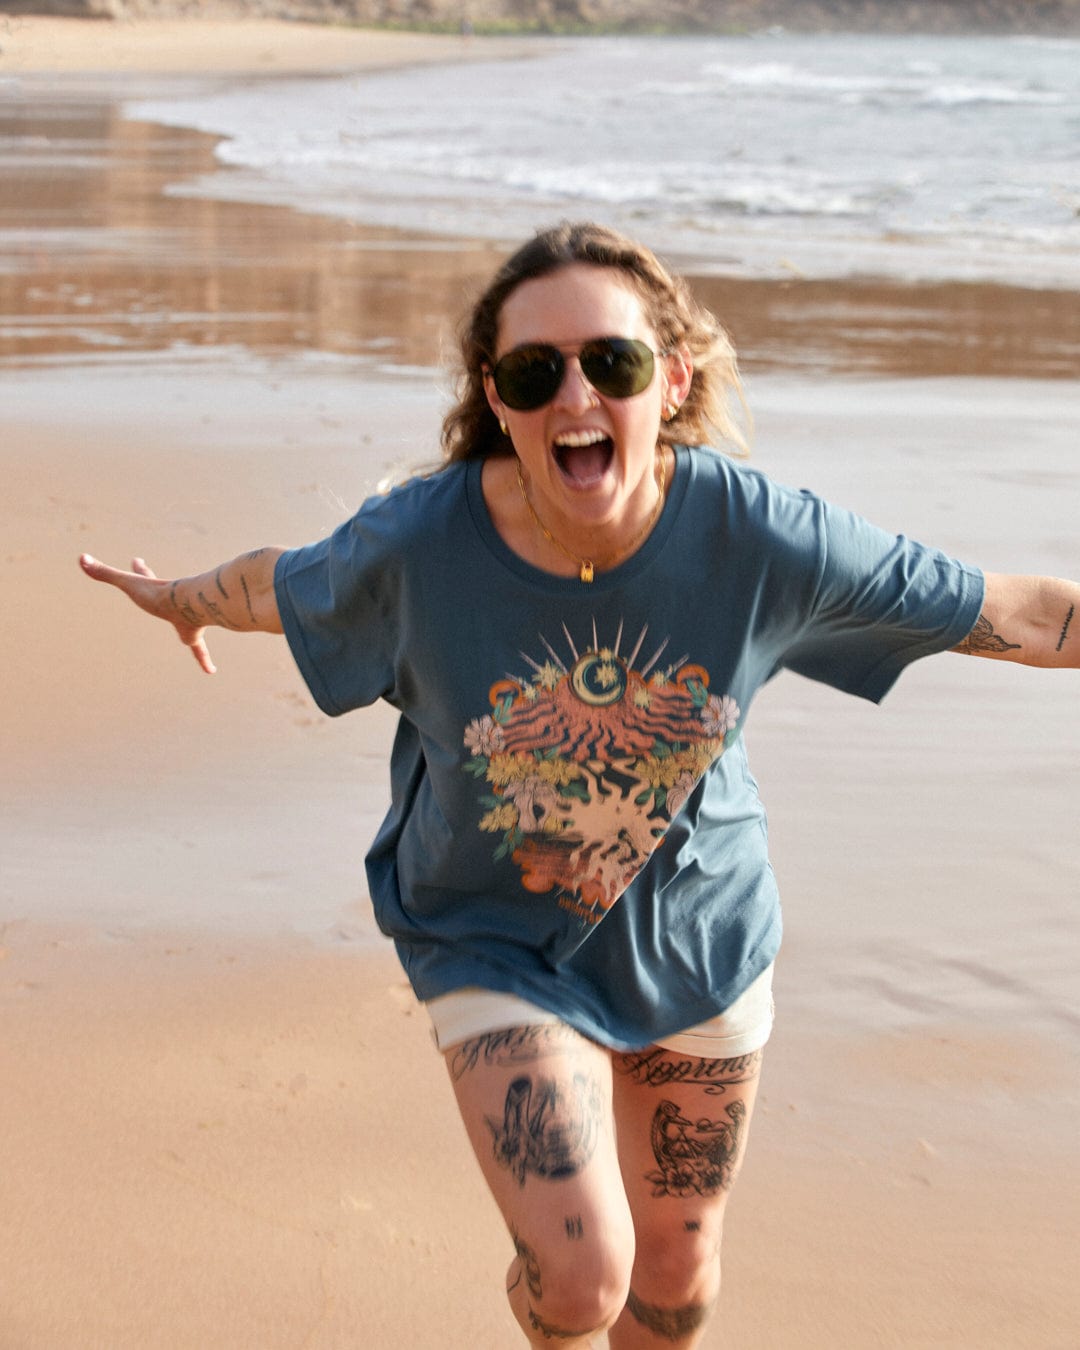 A joyful woman with tattoos wearing sunglasses and a Saltrock Better Days - Recycled Womens Short Sleeve Relaxed T-Shirt in Teal runs on a sandy beach, her arms outstretched.